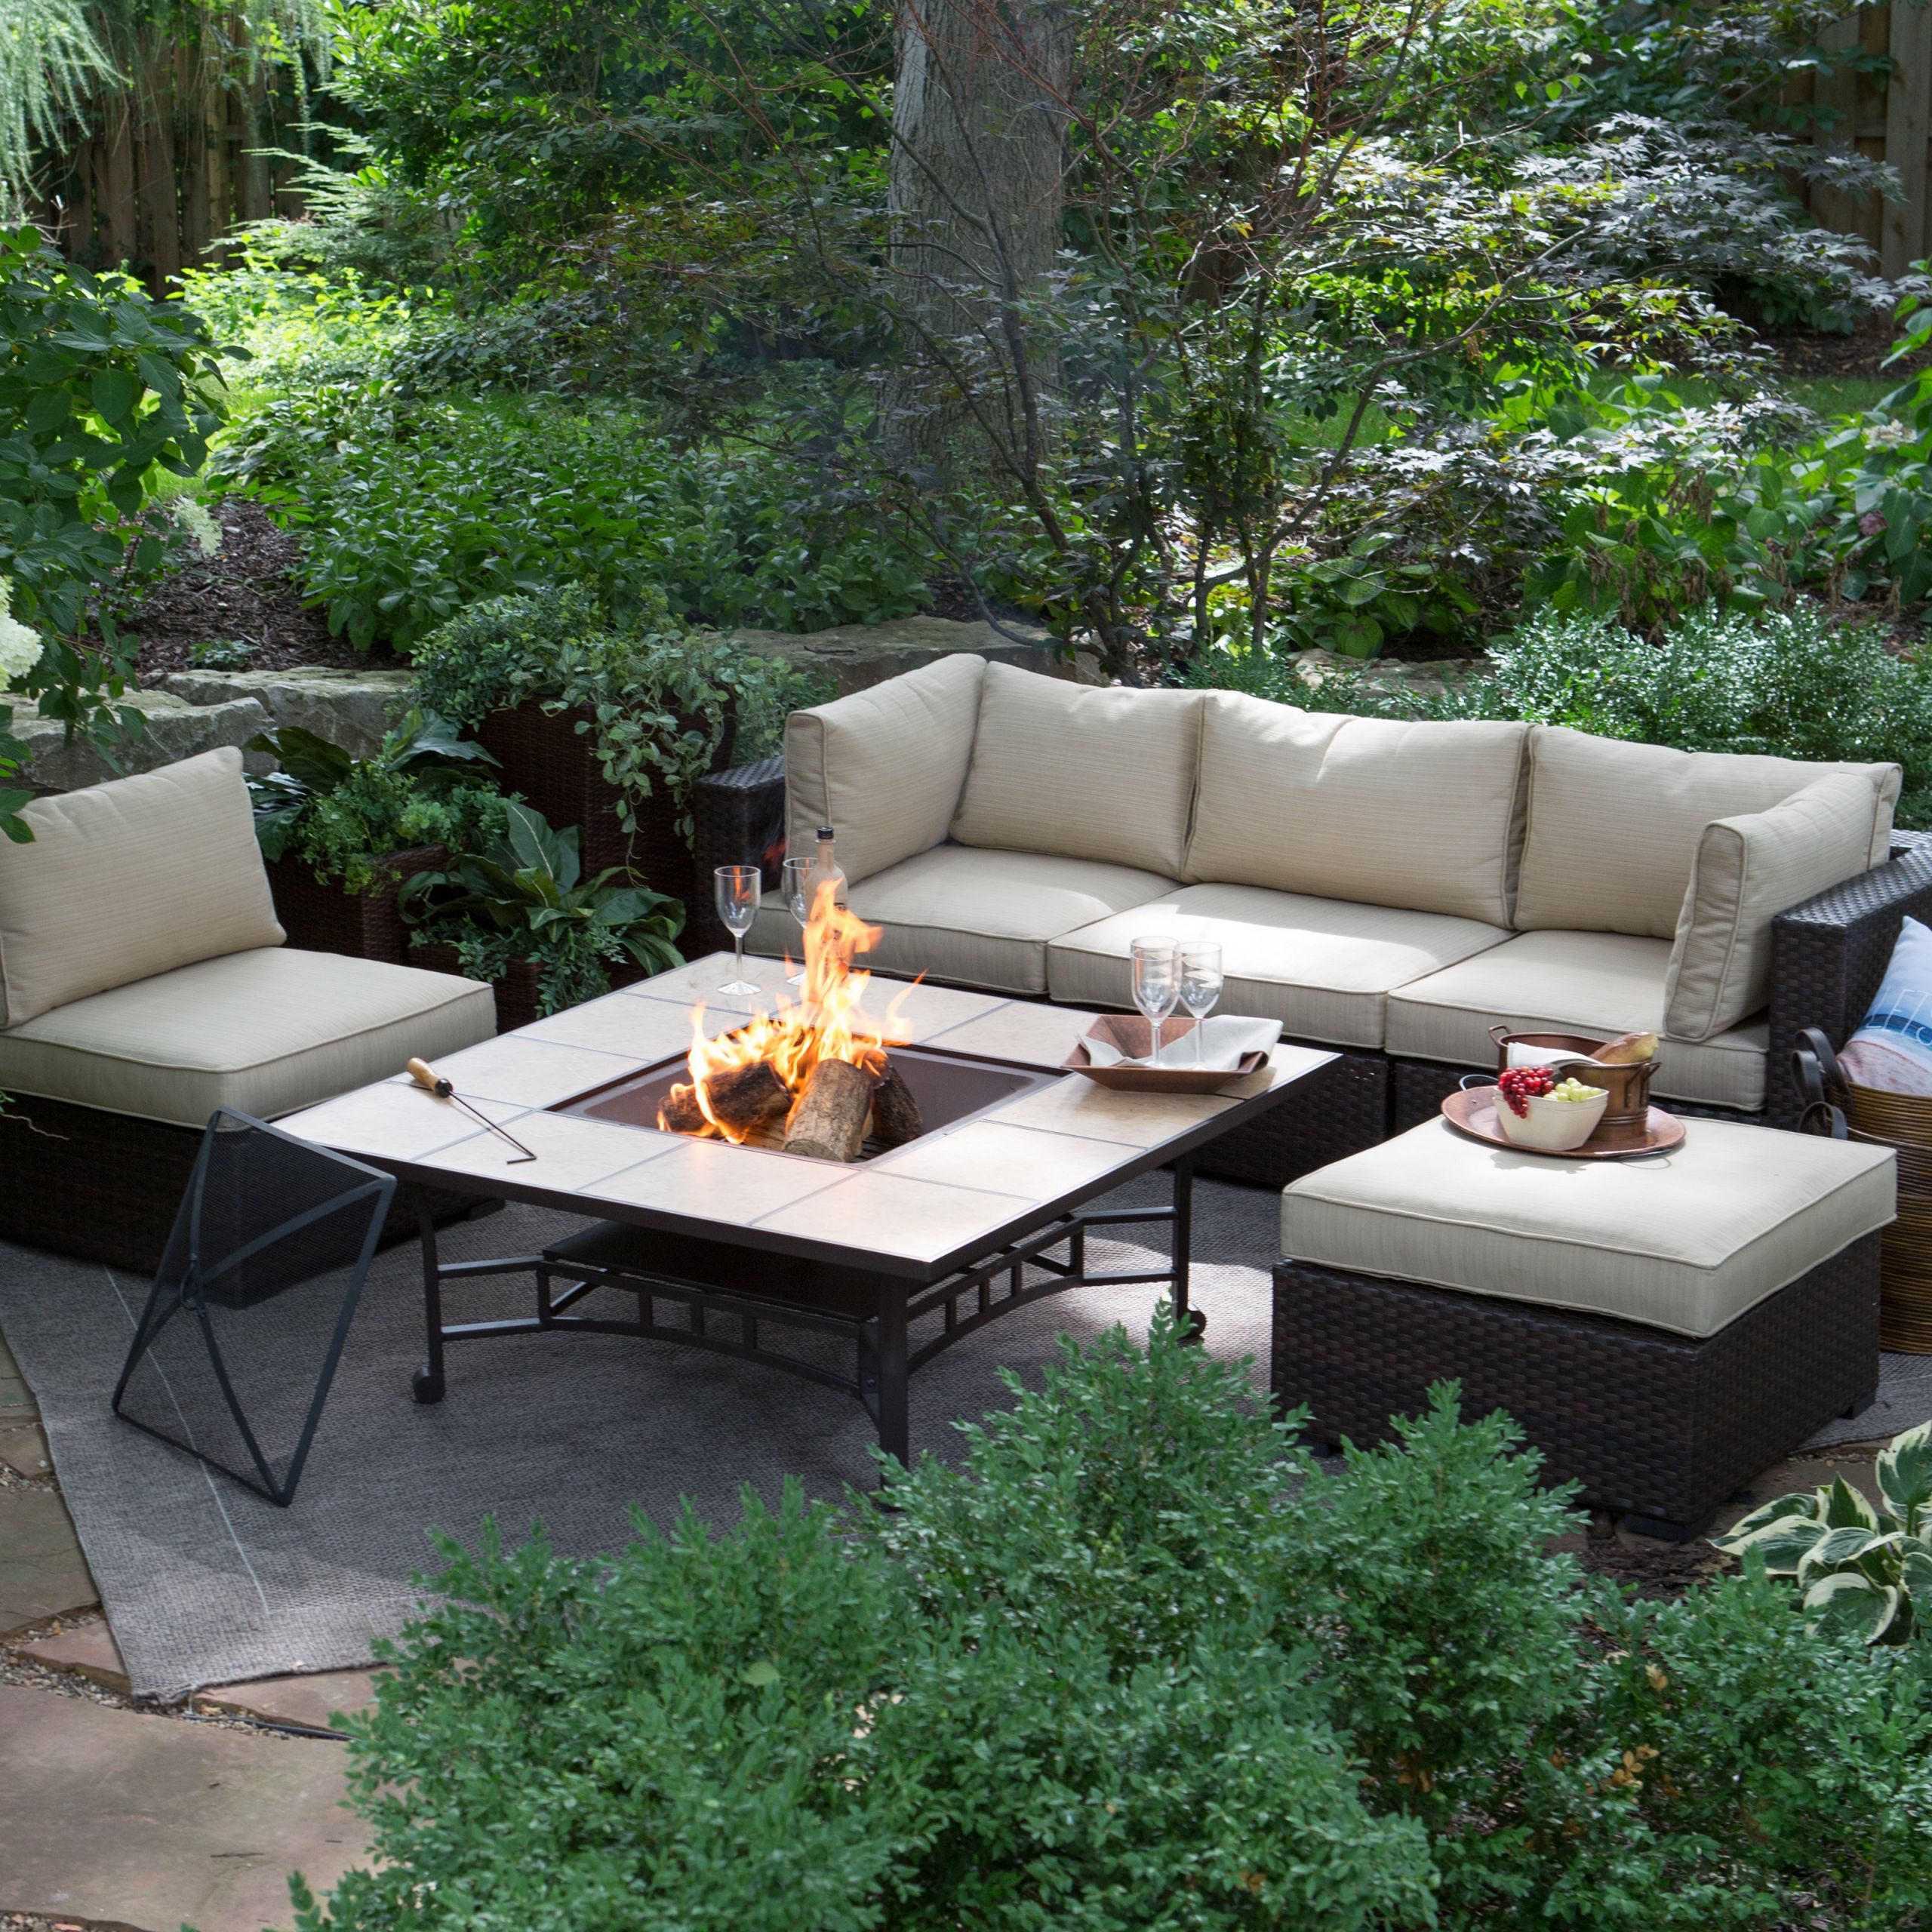 Firepit Patio Set
 Sectional Firepit Outdoor Patio Furniture With Fire Pit